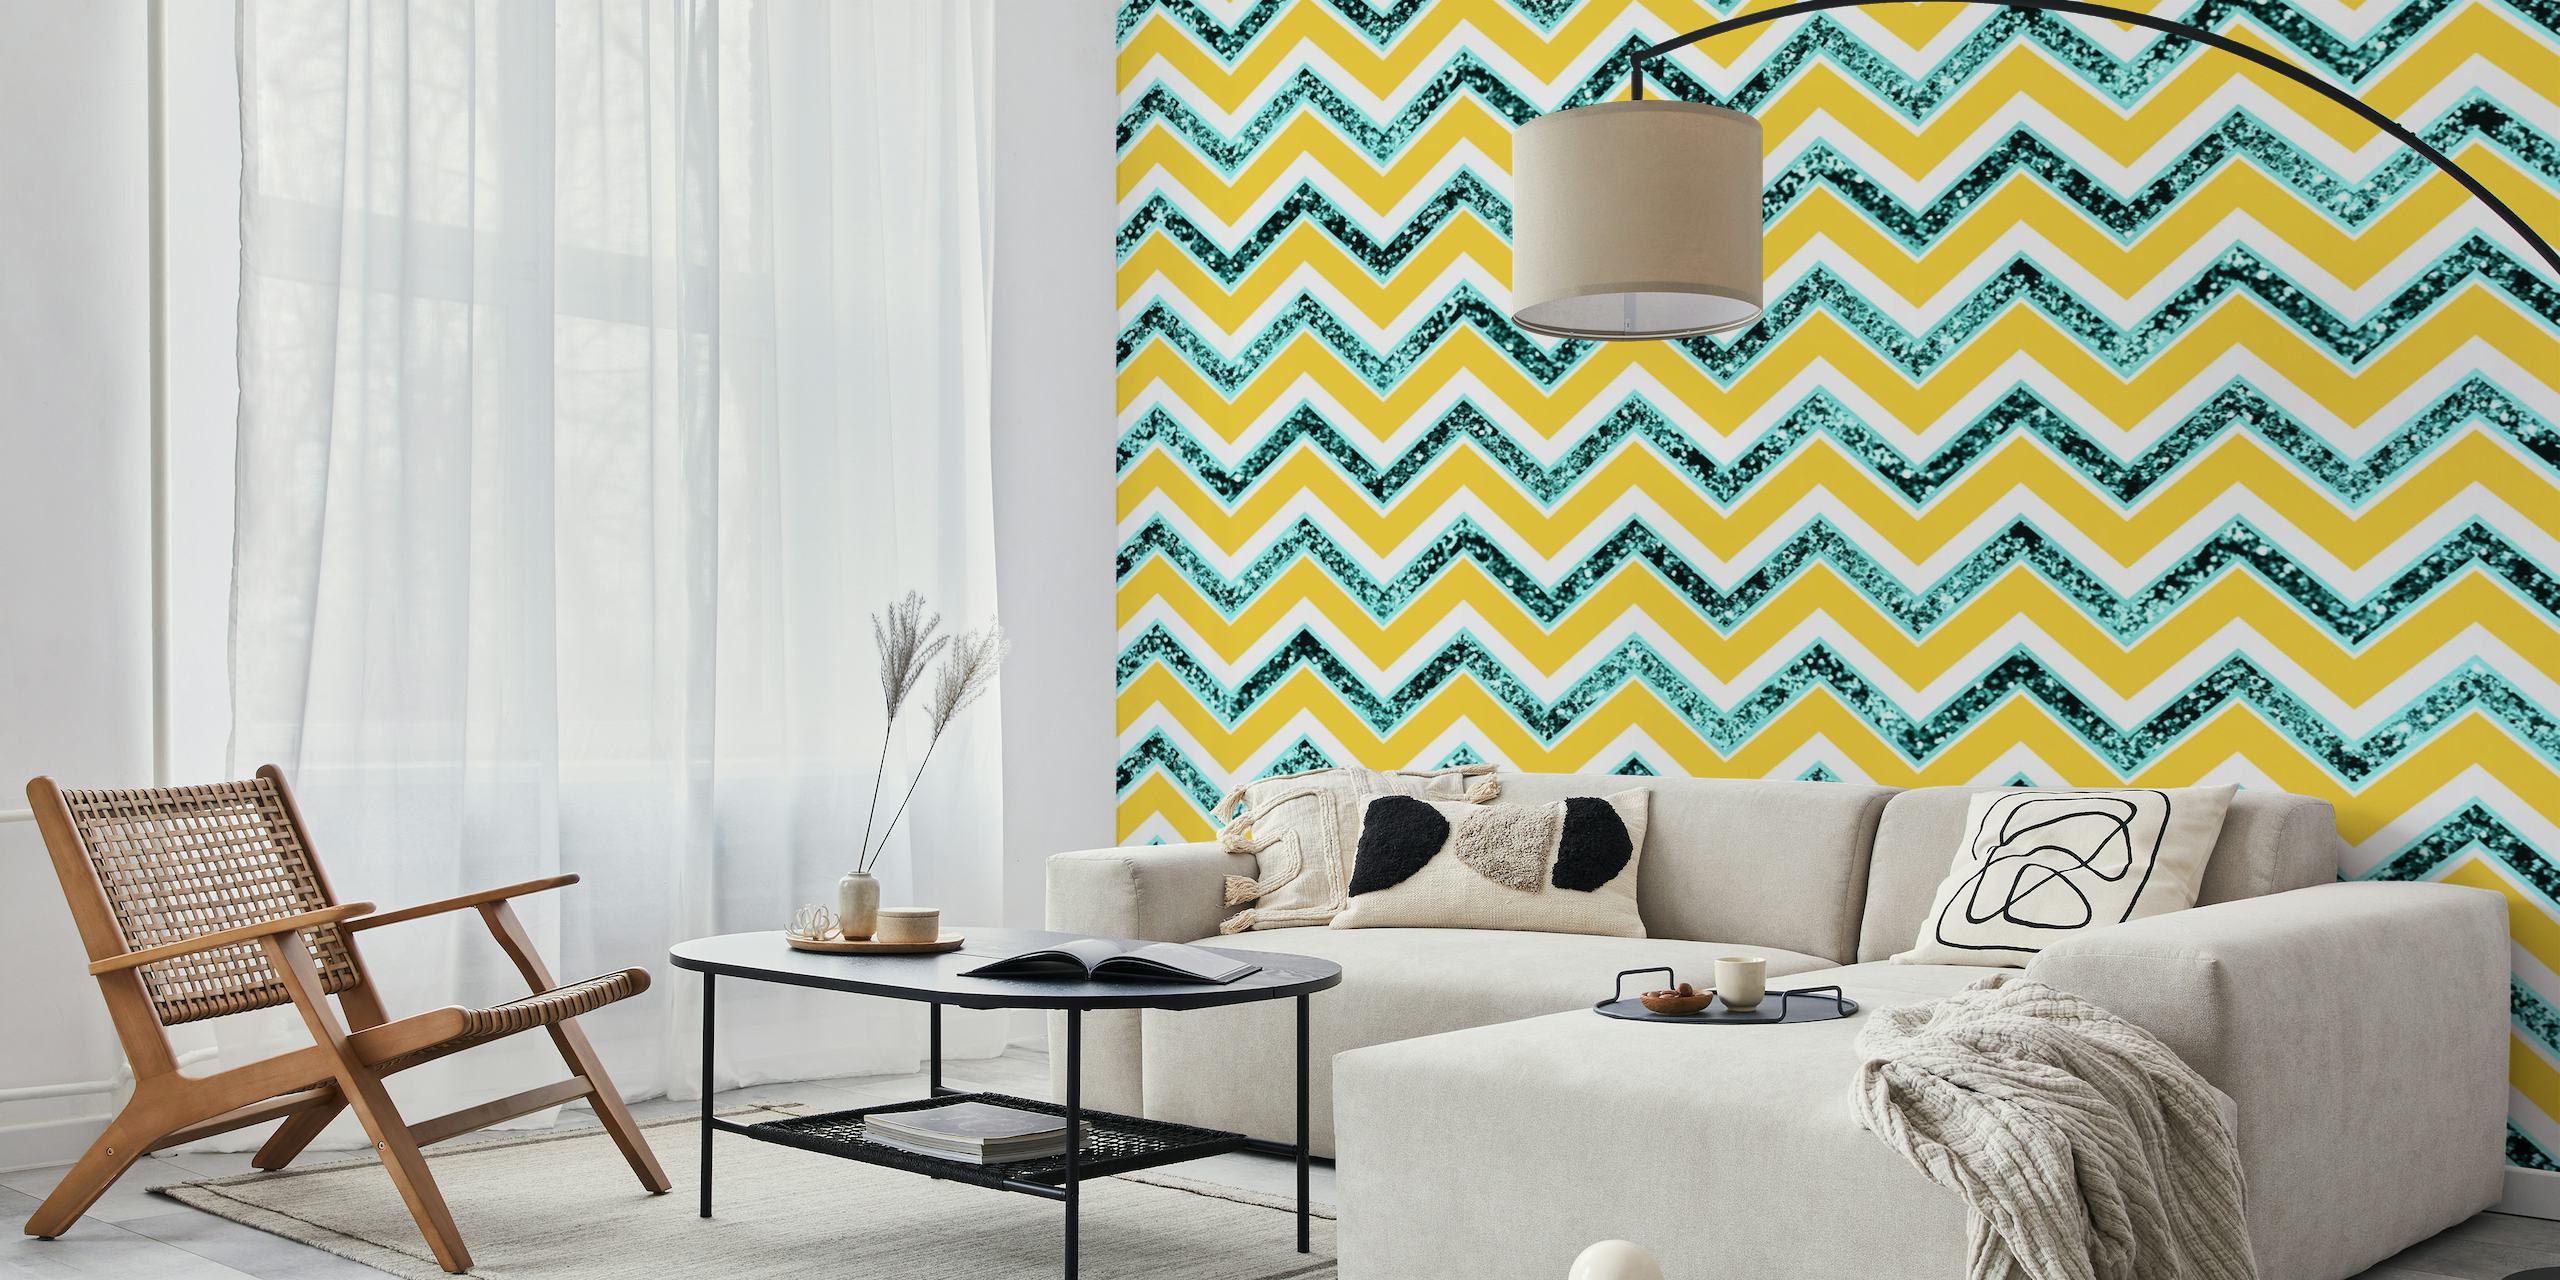 Chevron Glitter Glam 6 wall mural with gold and teal zigzag pattern and glitter effect